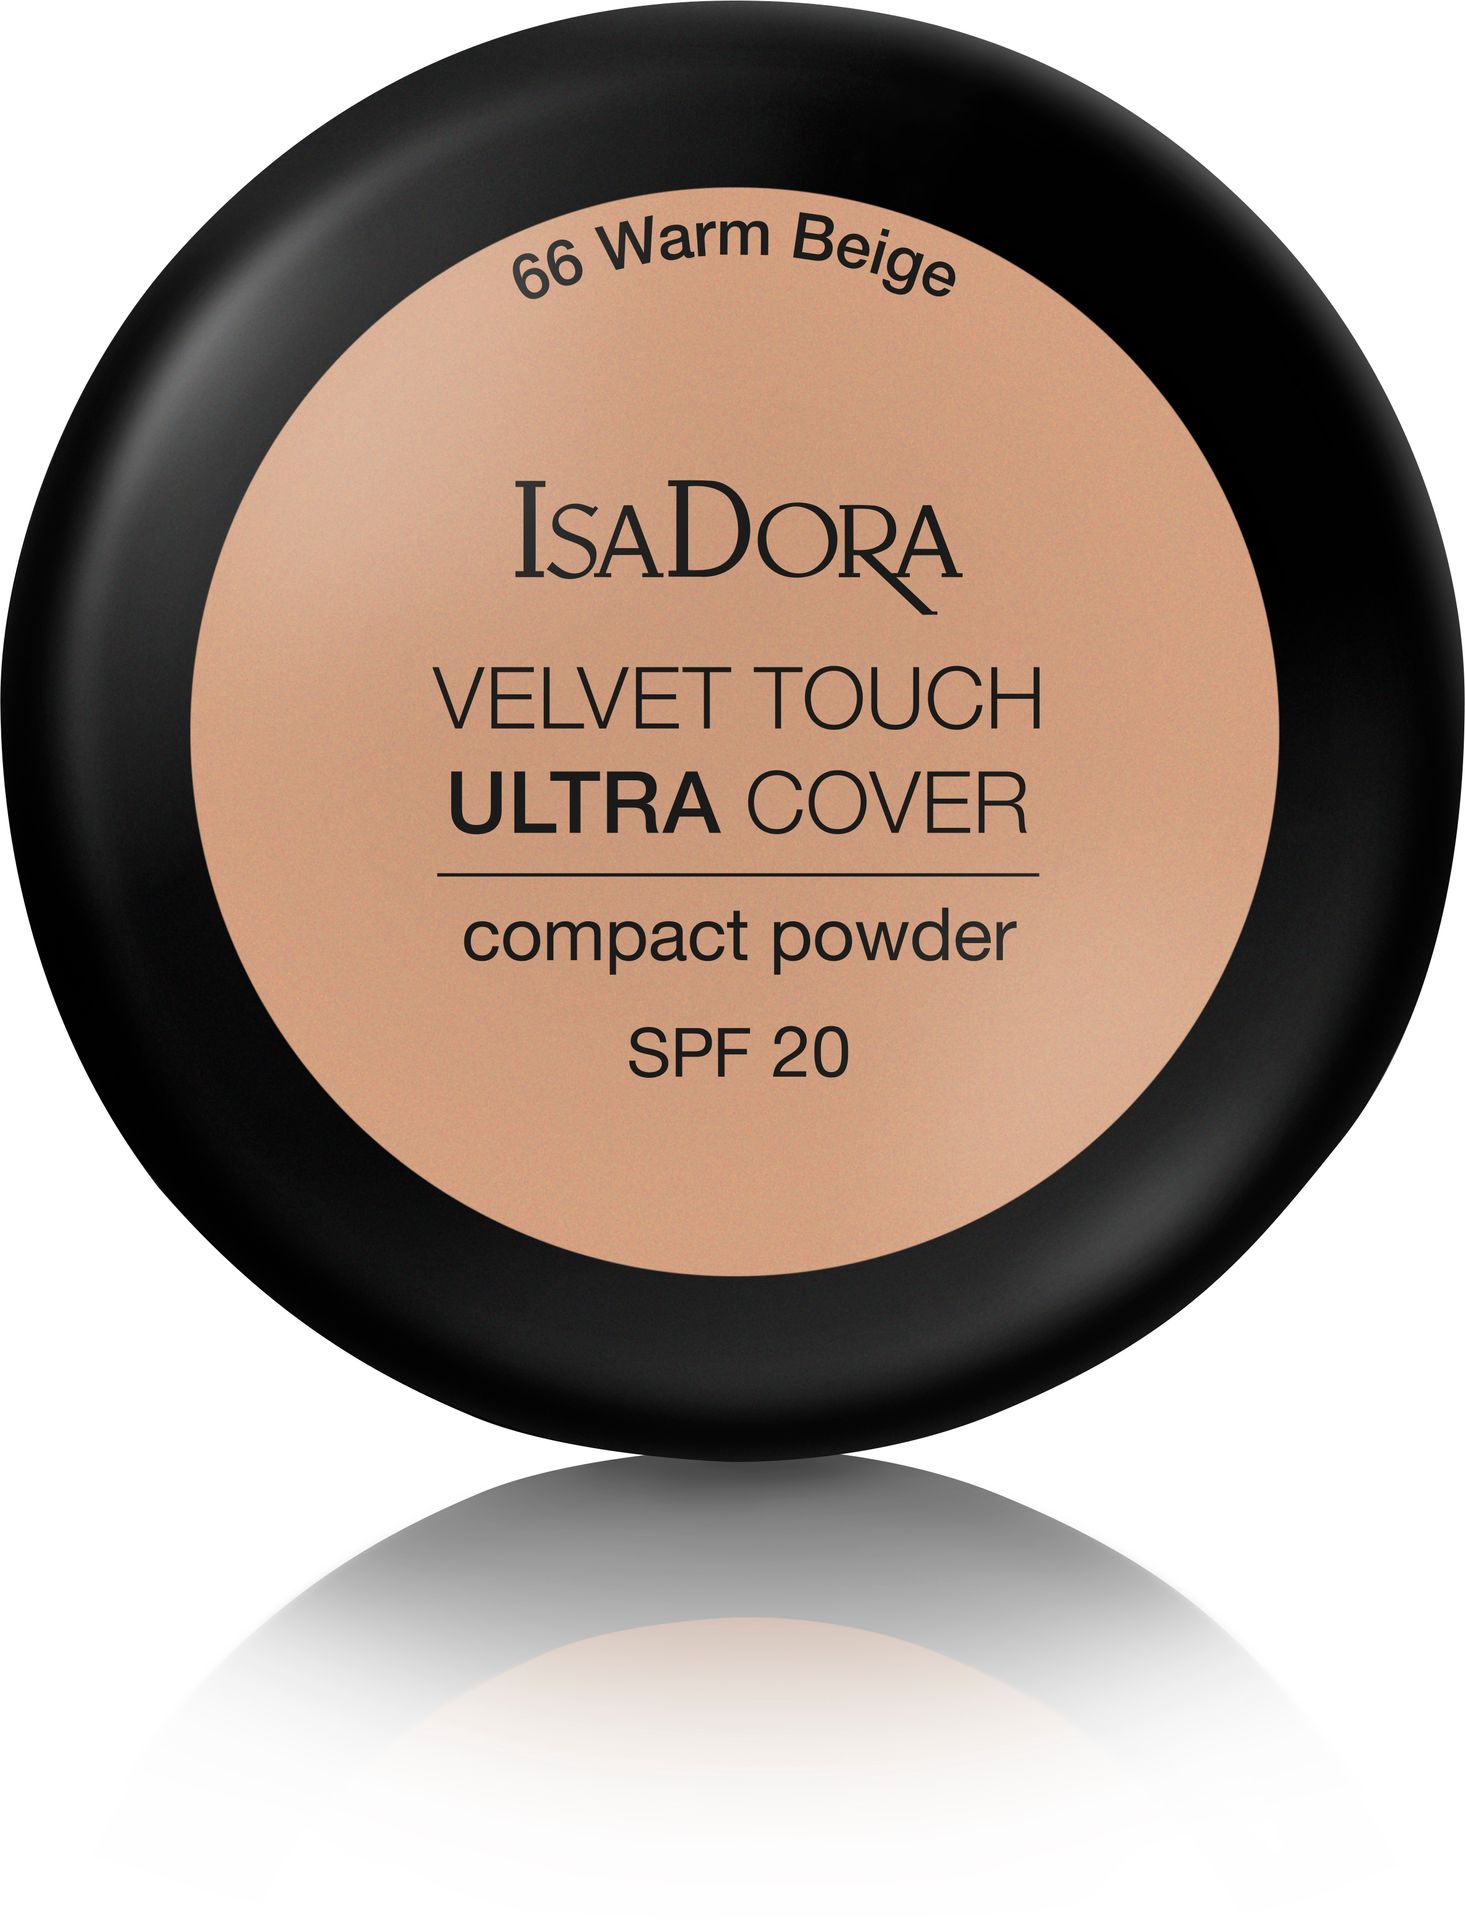 IsaDora Velvet Touch Ultra Cover Compact Power SPF 20 66 Warm Beige